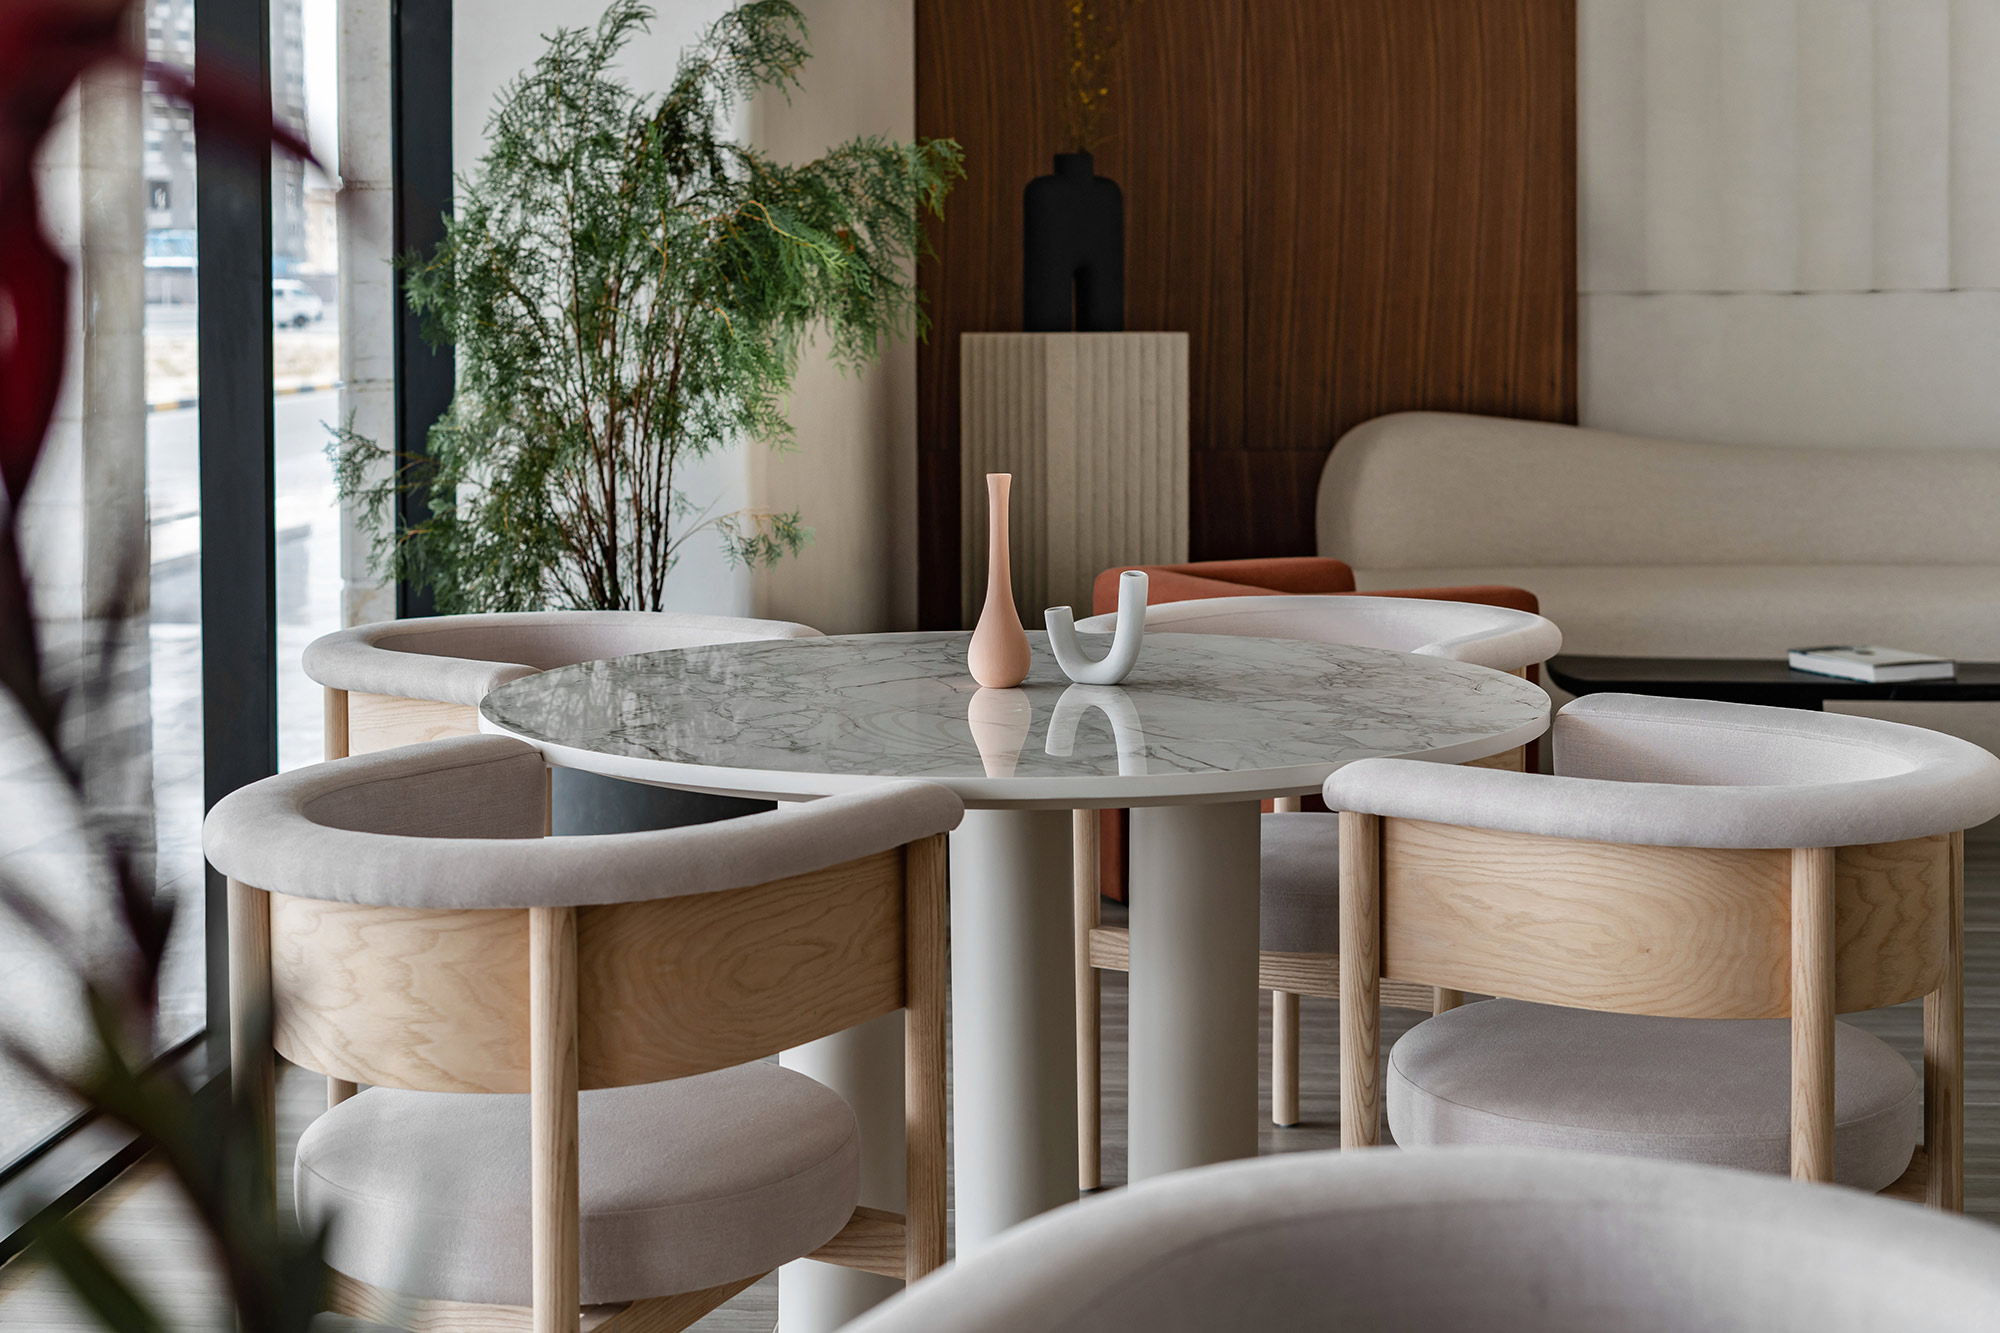 Image of The House by Cest ici Design 1 in Tables with Dekton Bergen for coffee lovers in a cozy Emirati space - Cosentino